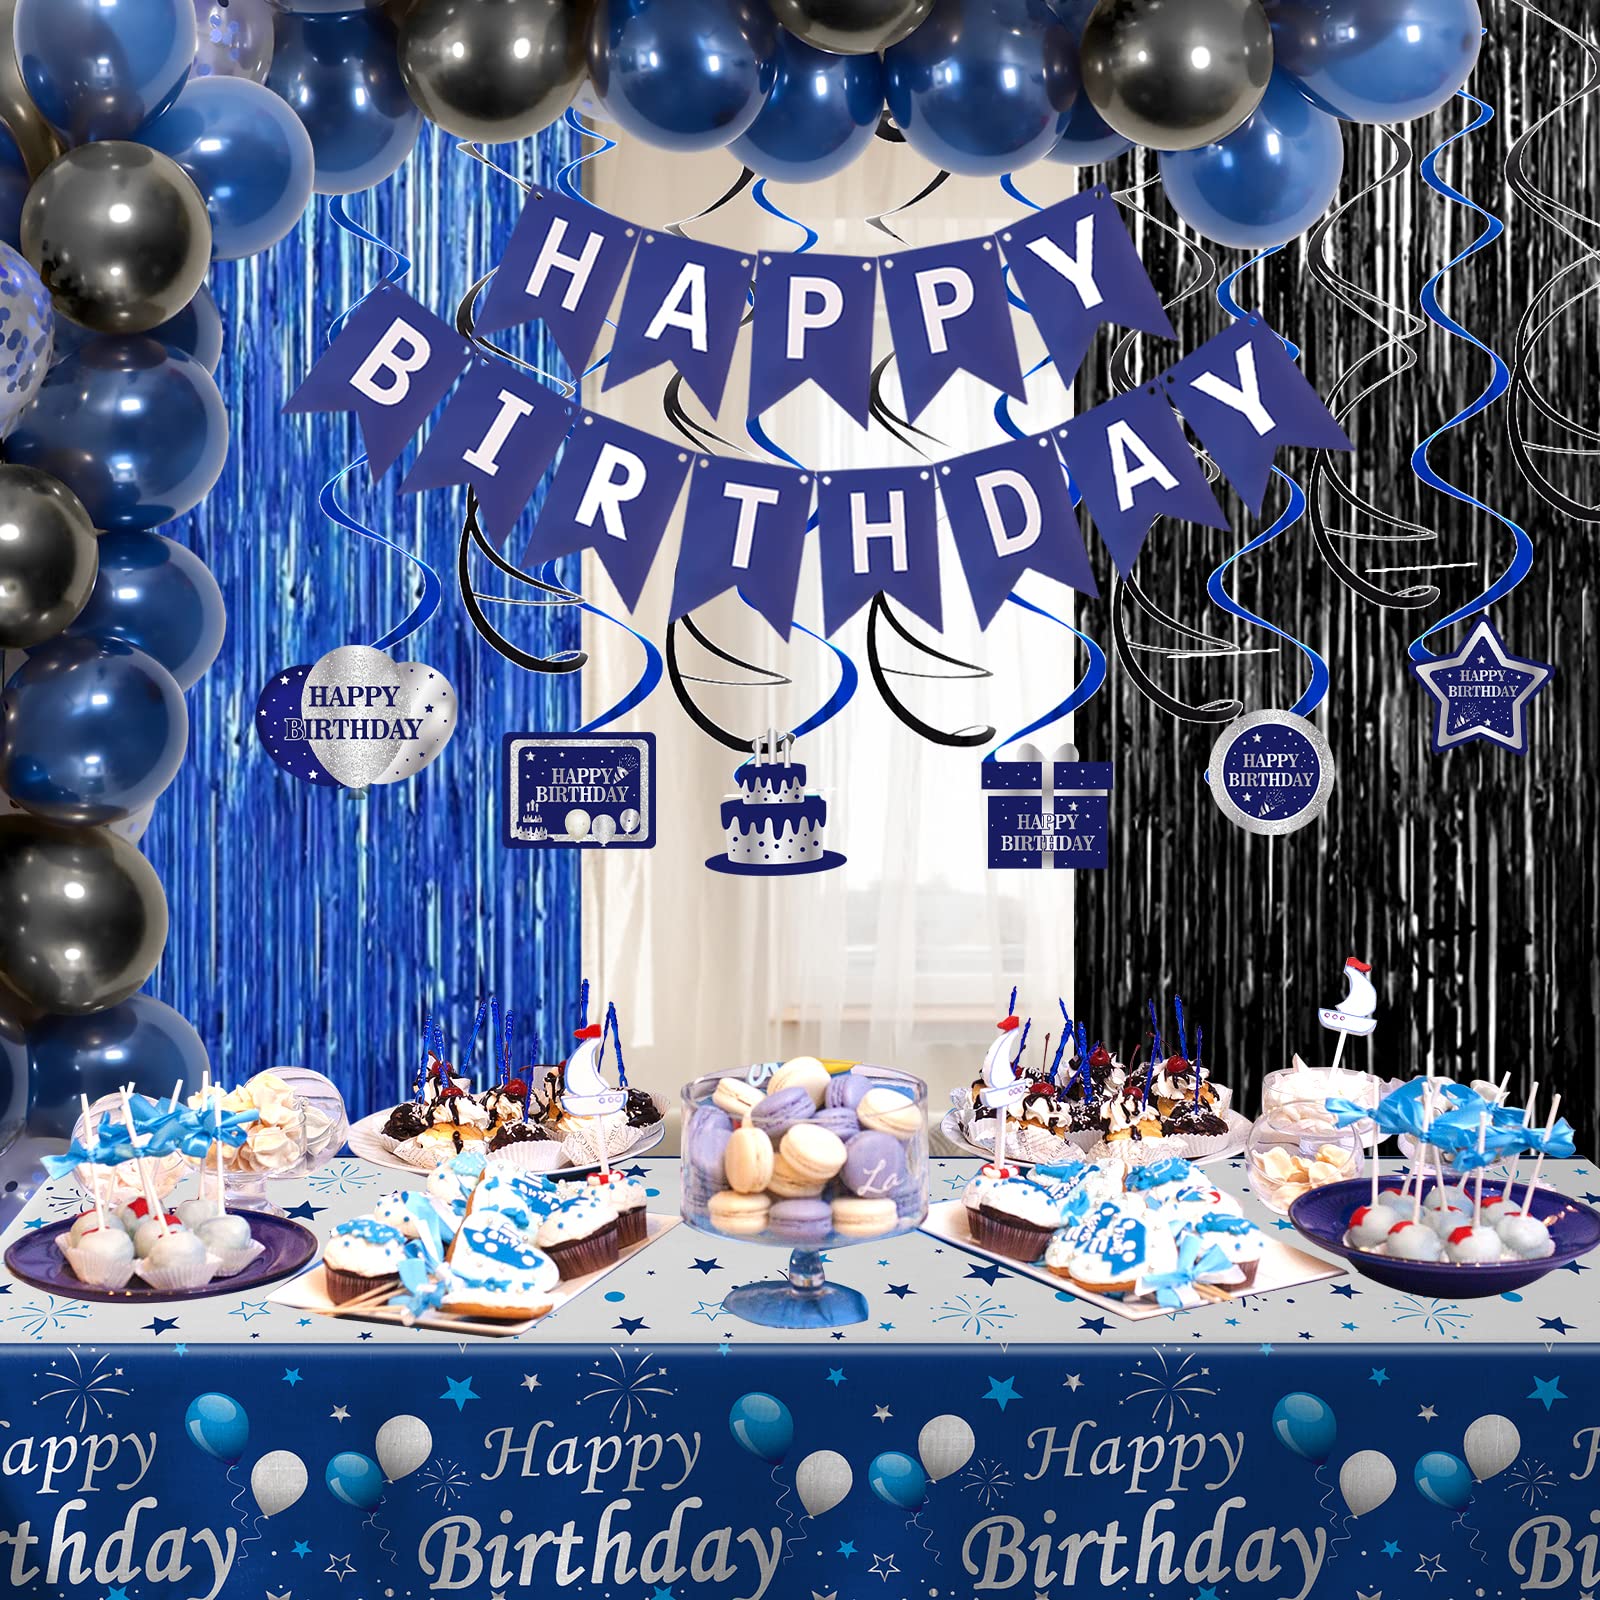 Blue and Black Birthday Decorations for Men Women Boys Girls,Happy Birthday Party Decorations with Happy Birthday Banner, Tablecloth and Fringe Curtains, Party Supplies for Bday Party Decor